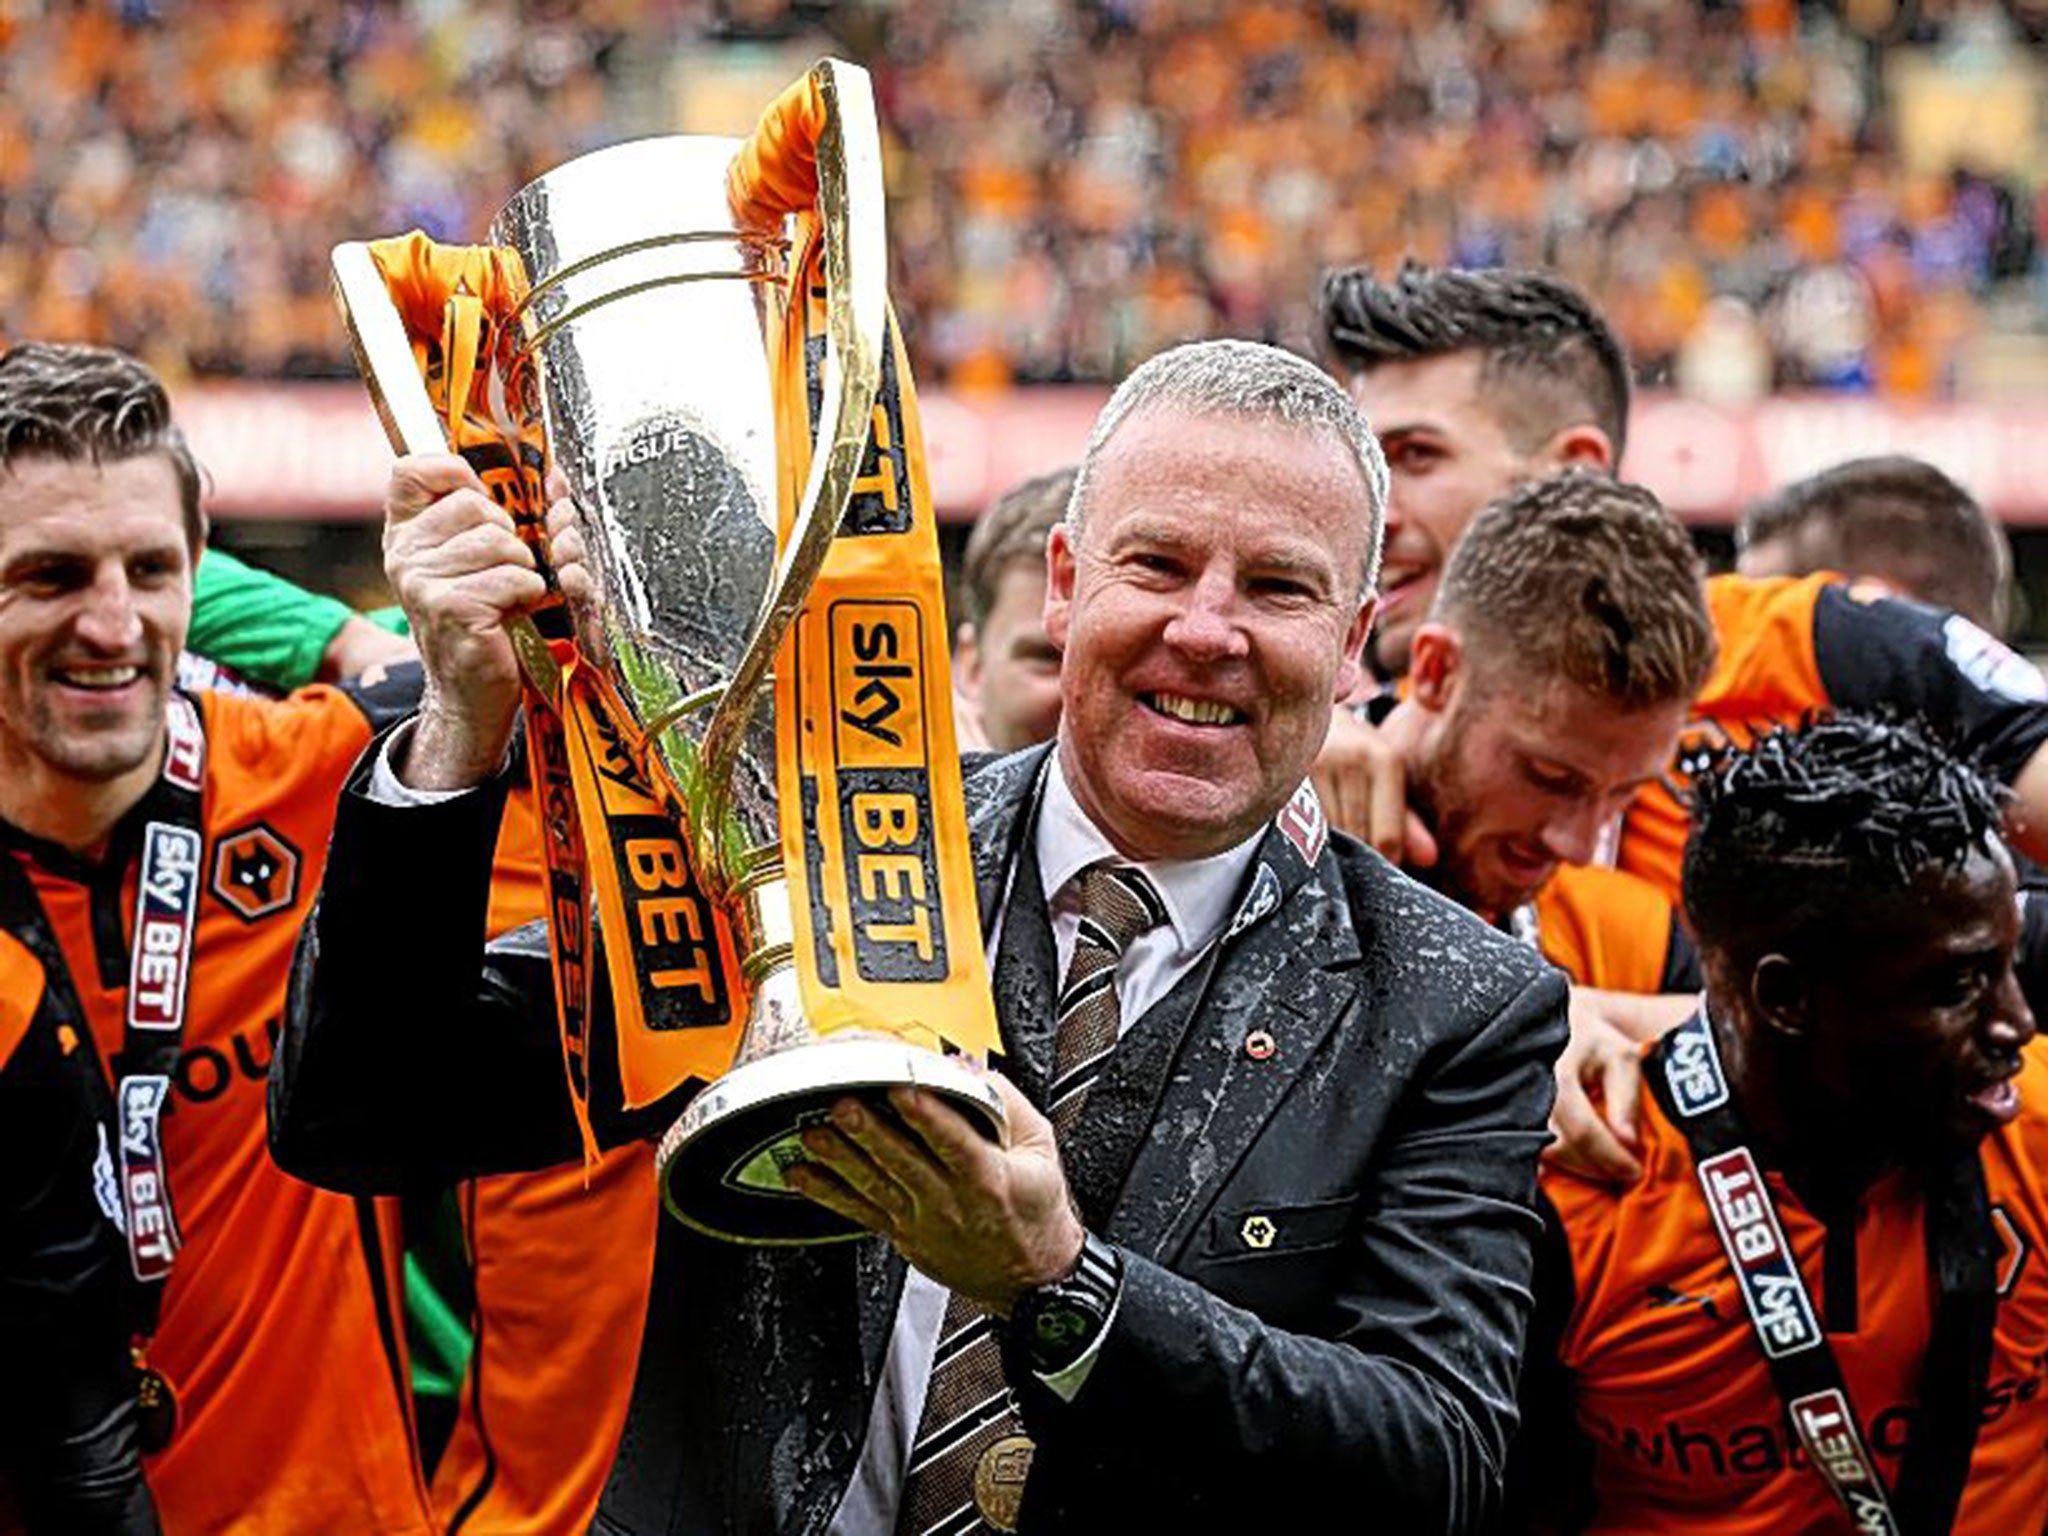 Kenny Jackett holds the League One trophy, won by Wolves with 103 points